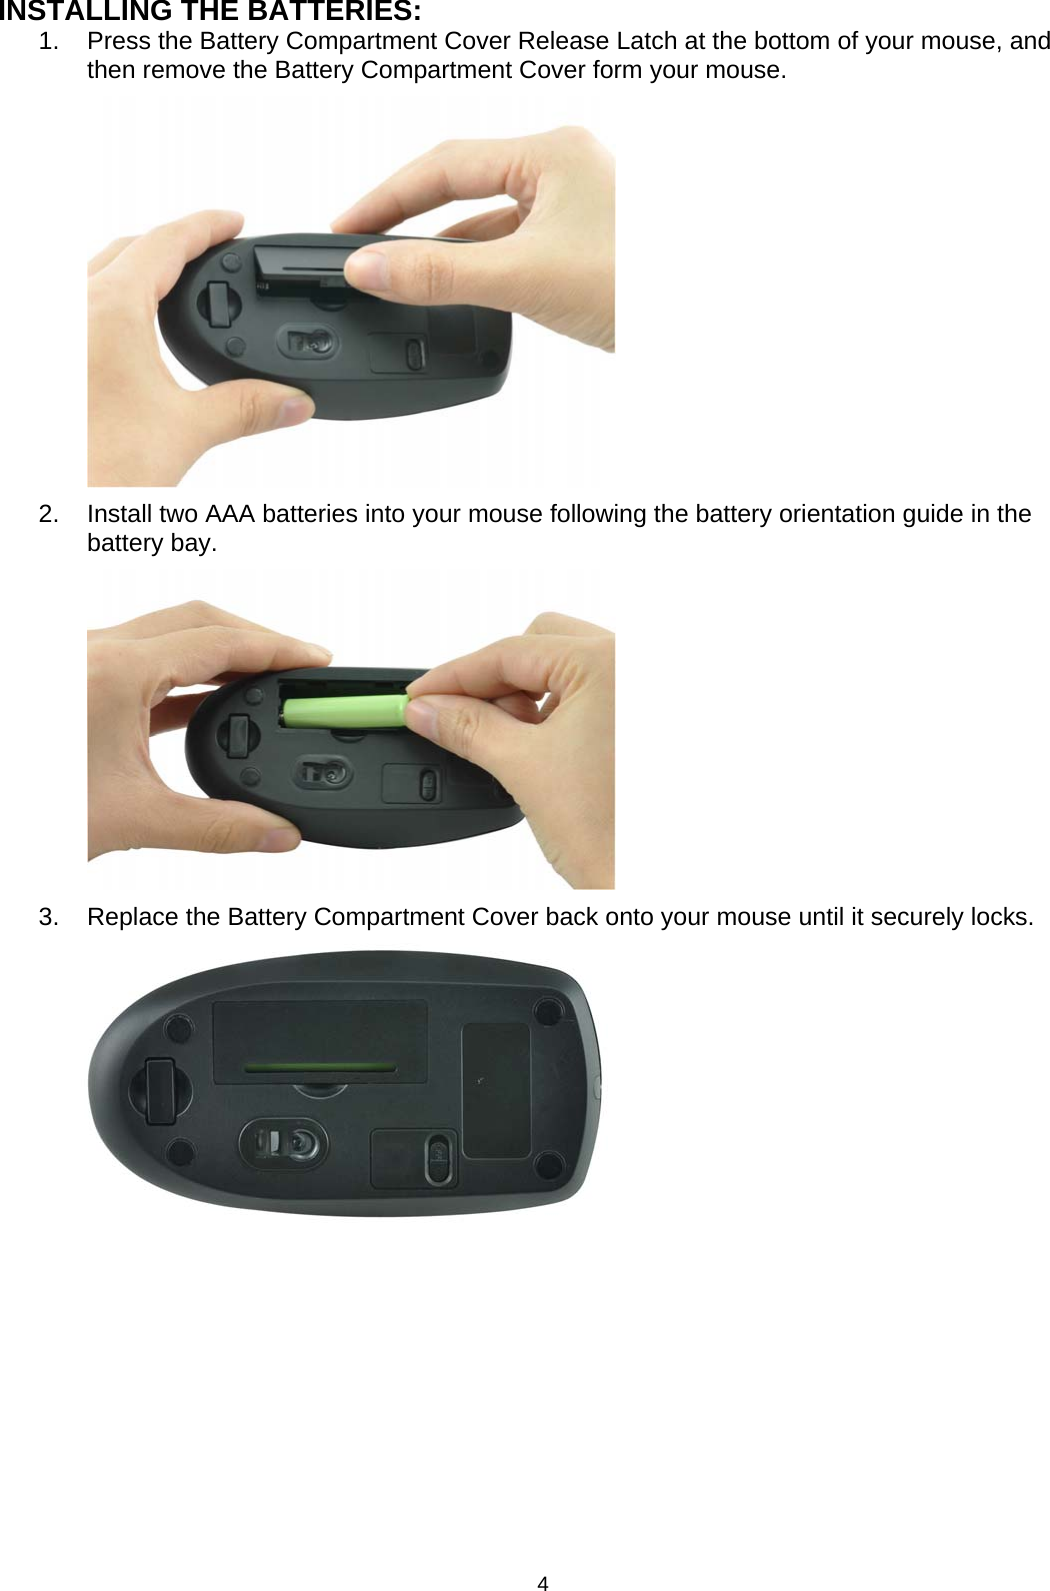 INSTALLING THE BATTERIES: 1.  Press the Battery Compartment Cover Release Latch at the bottom of your mouse, and then remove the Battery Compartment Cover form your mouse.          2.  Install two AAA batteries into your mouse following the battery orientation guide in the battery bay.          3.  Replace the Battery Compartment Cover back onto your mouse until it securely locks.                4 